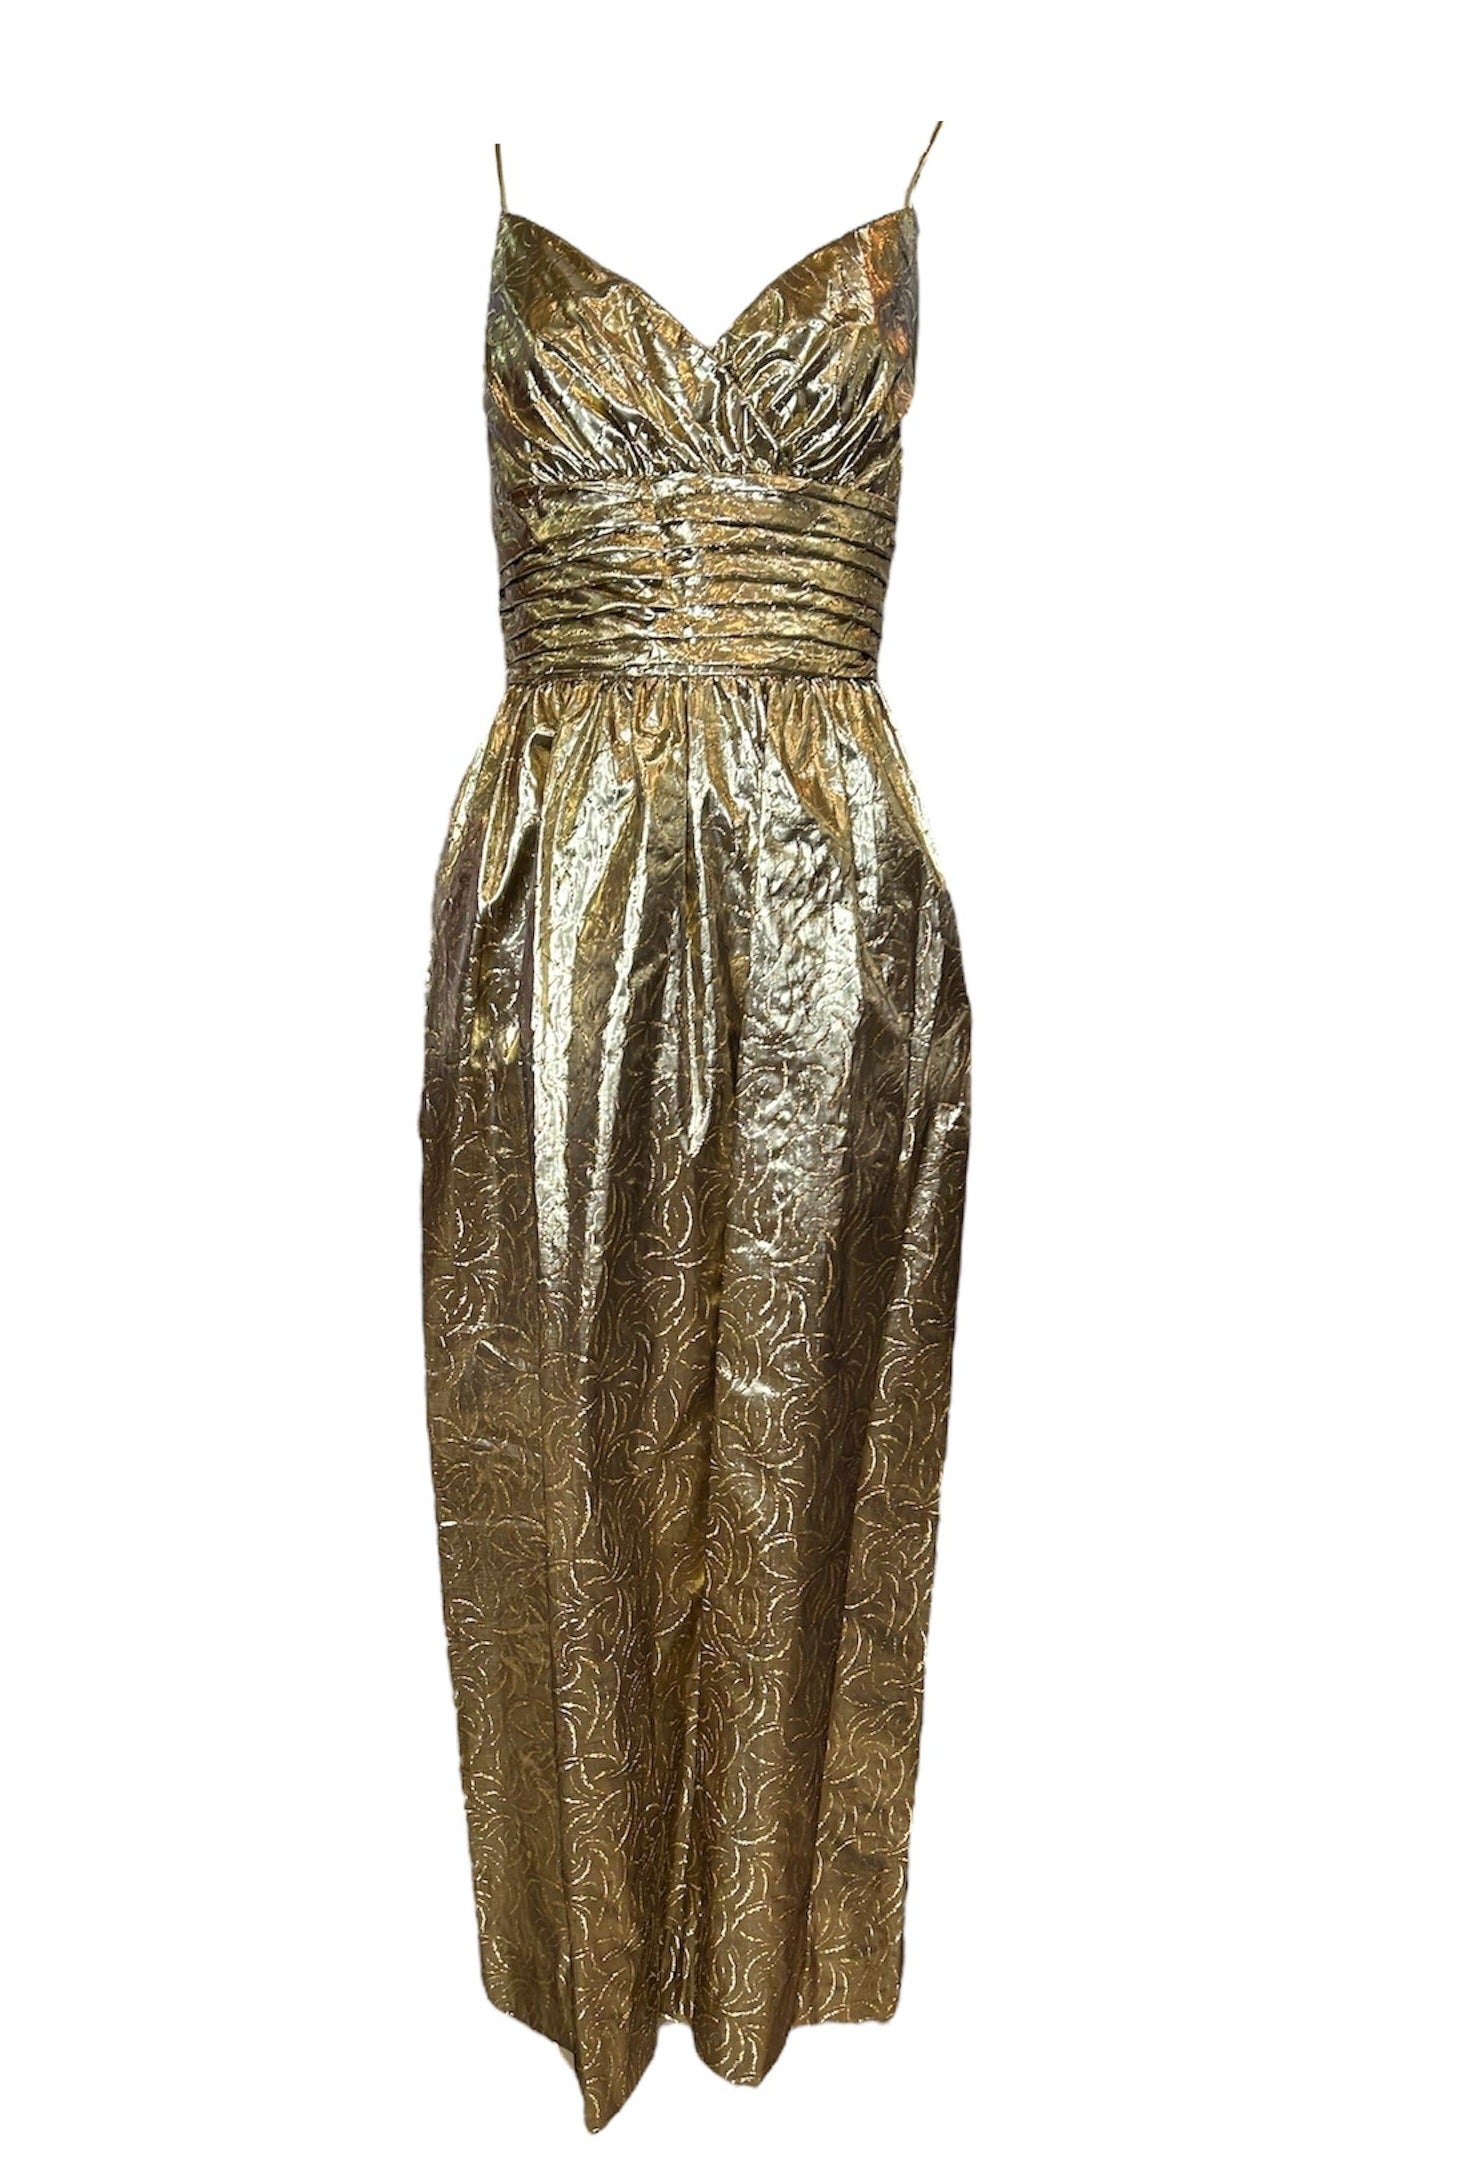 1960s Golden Bond Girl Lame Gown FRONT PHOTO 1 OF 5